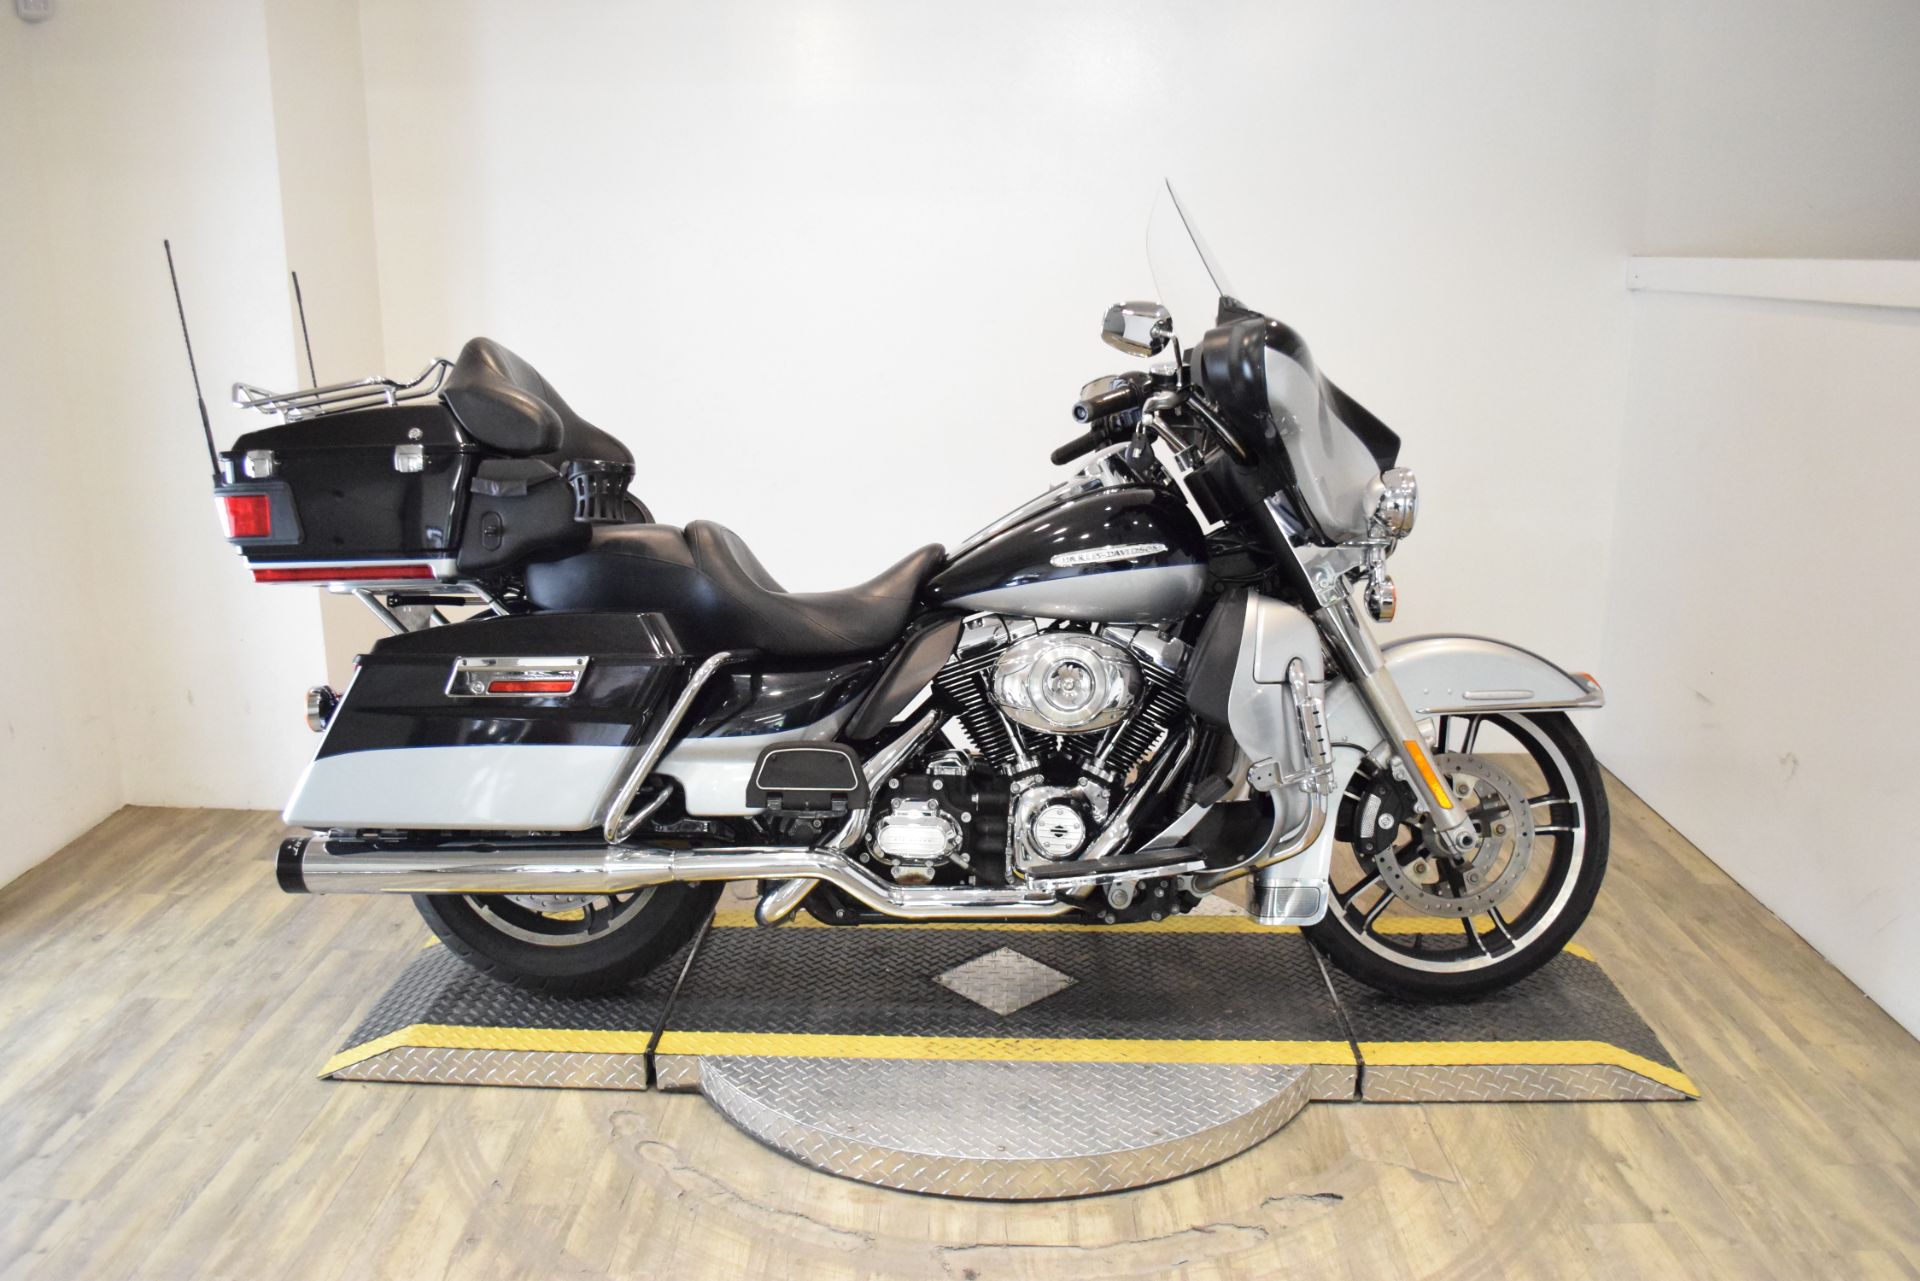 2012 Harley-Davidson Electra Glide® Ultra Limited in Wauconda, Illinois - Photo 1